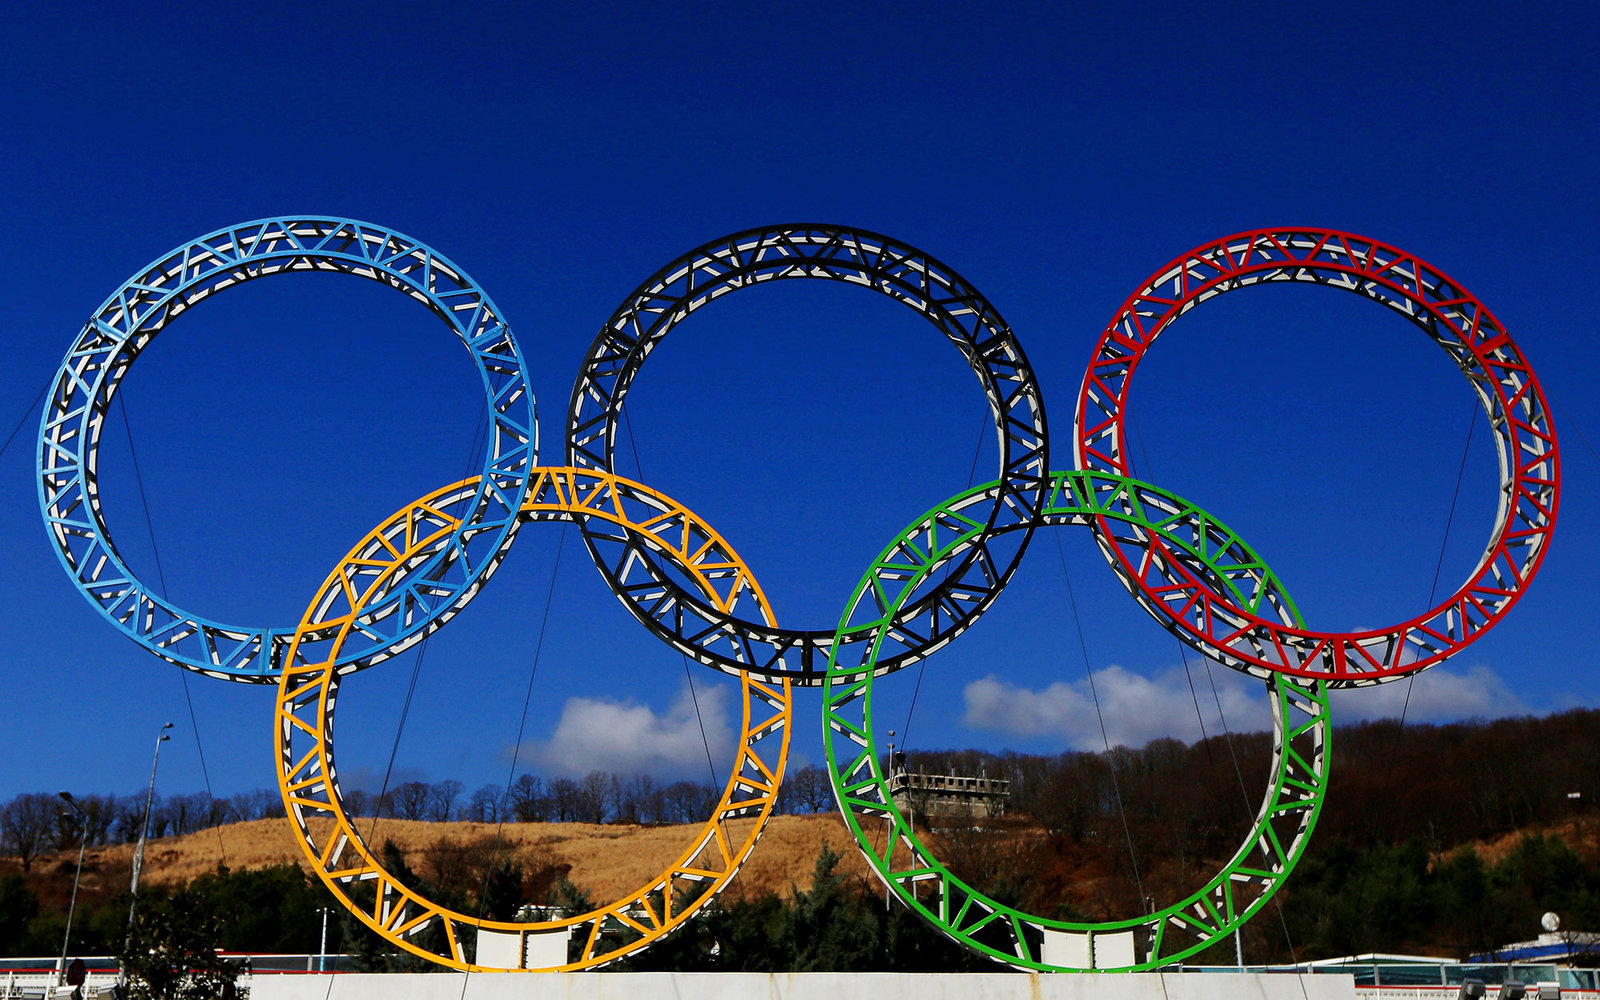 ADLER, RUSSIA - JANUARY 08:  The Olympic Rings stand outside of Sochi International Airport on January 8, 2014 in Alder, Russia. The region will host the Sochi 2014 Winter Olympics which start on February 6th, 2014.  (Photo by Michael Heiman/)